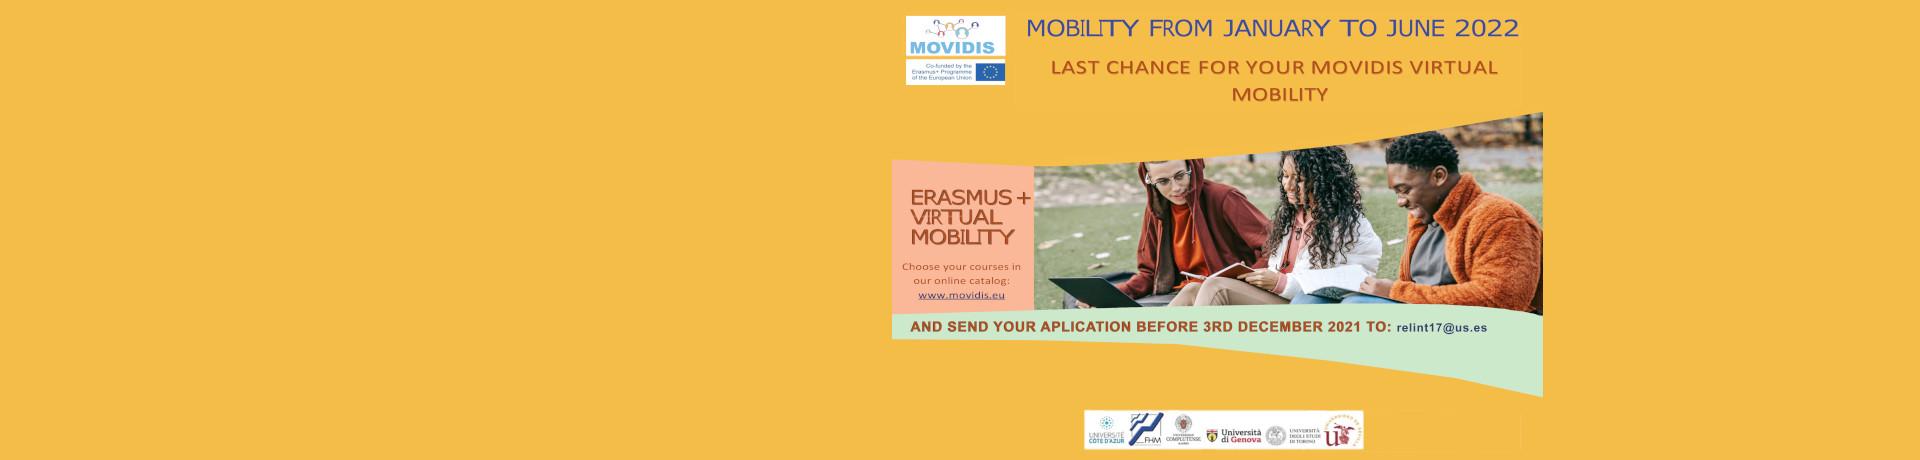 Mobility from january to june 2022